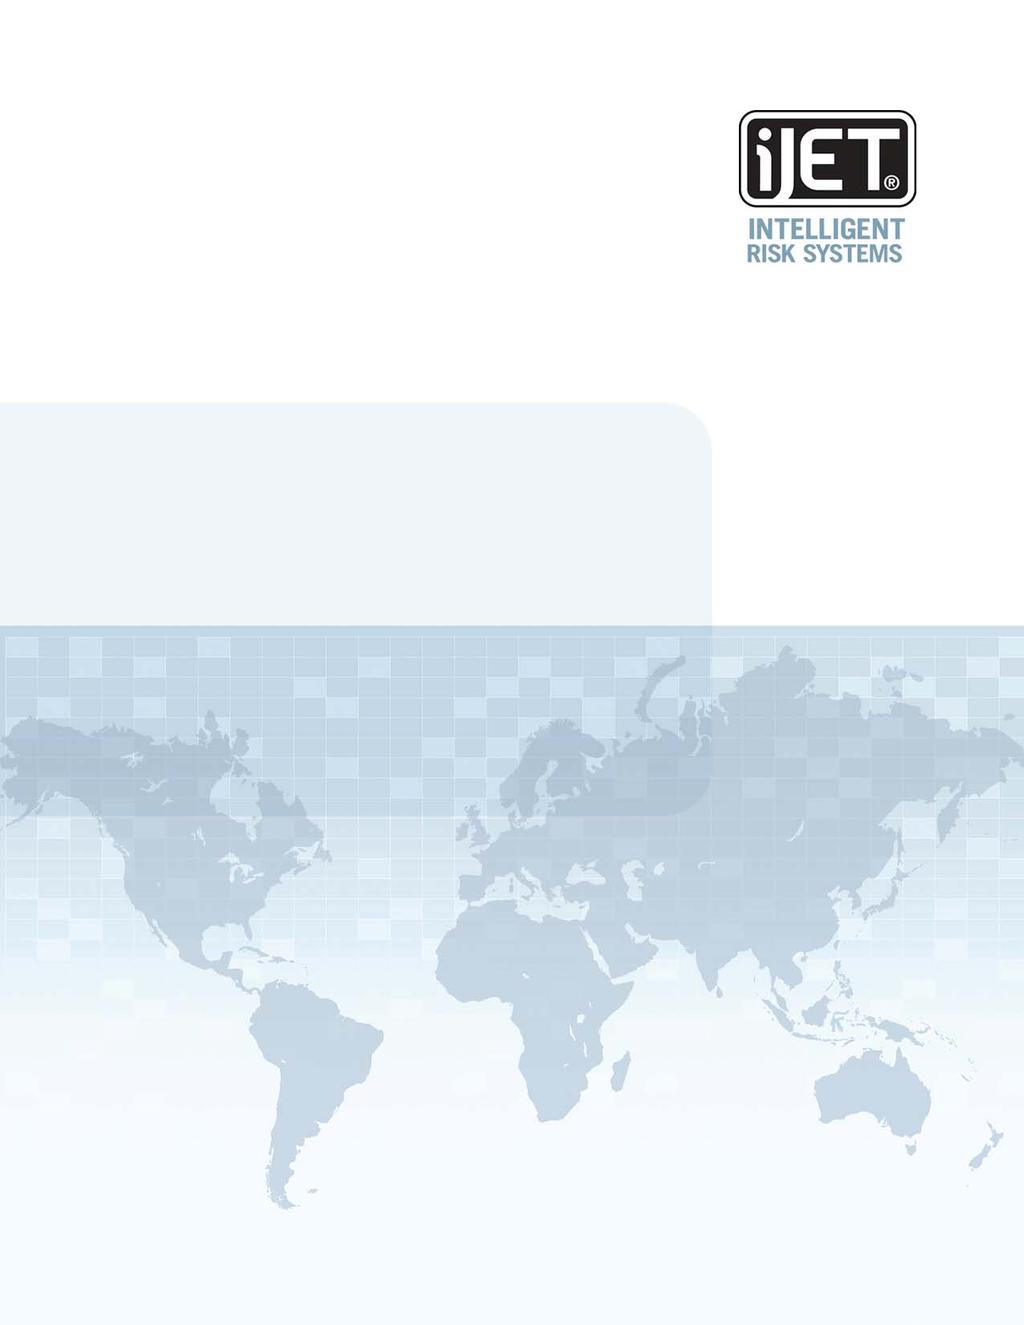 ijet/wp0010-06 2008 BUSINESS RESILIENCY SURVEY RESULTS: An Insider's Look at the Current